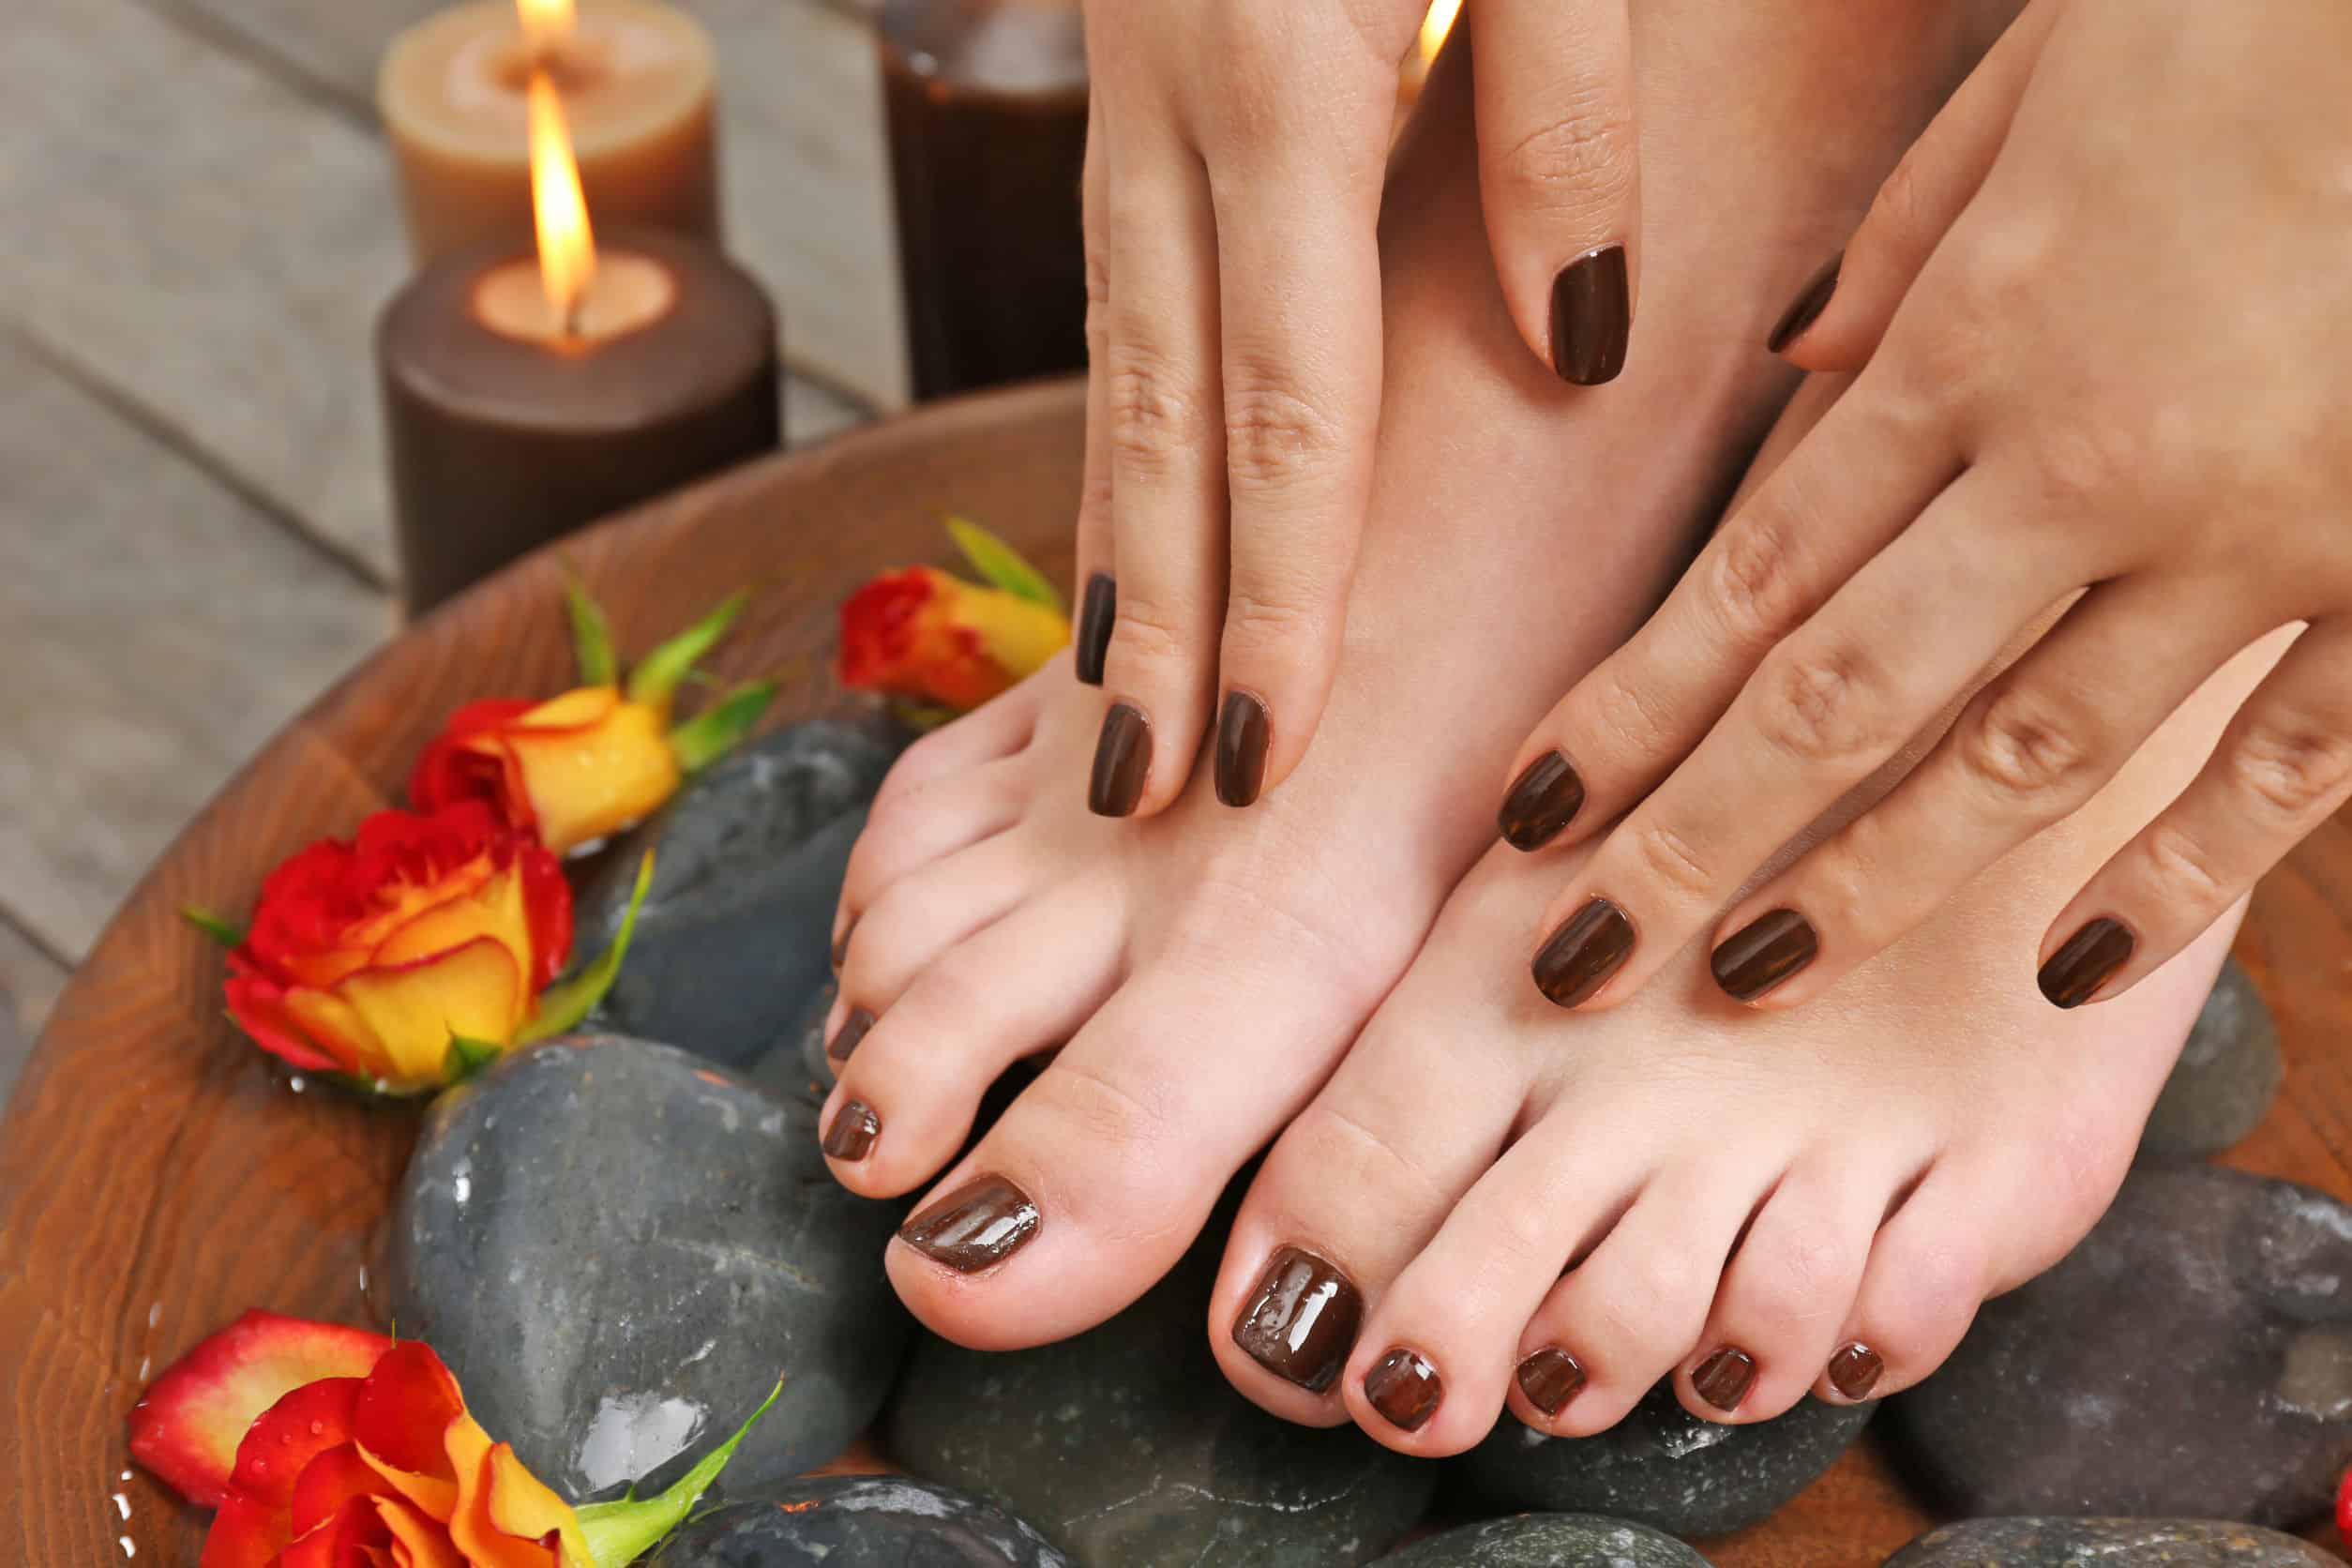 Nail Salon Near Me Pedicure - Nail and Manicure Trends